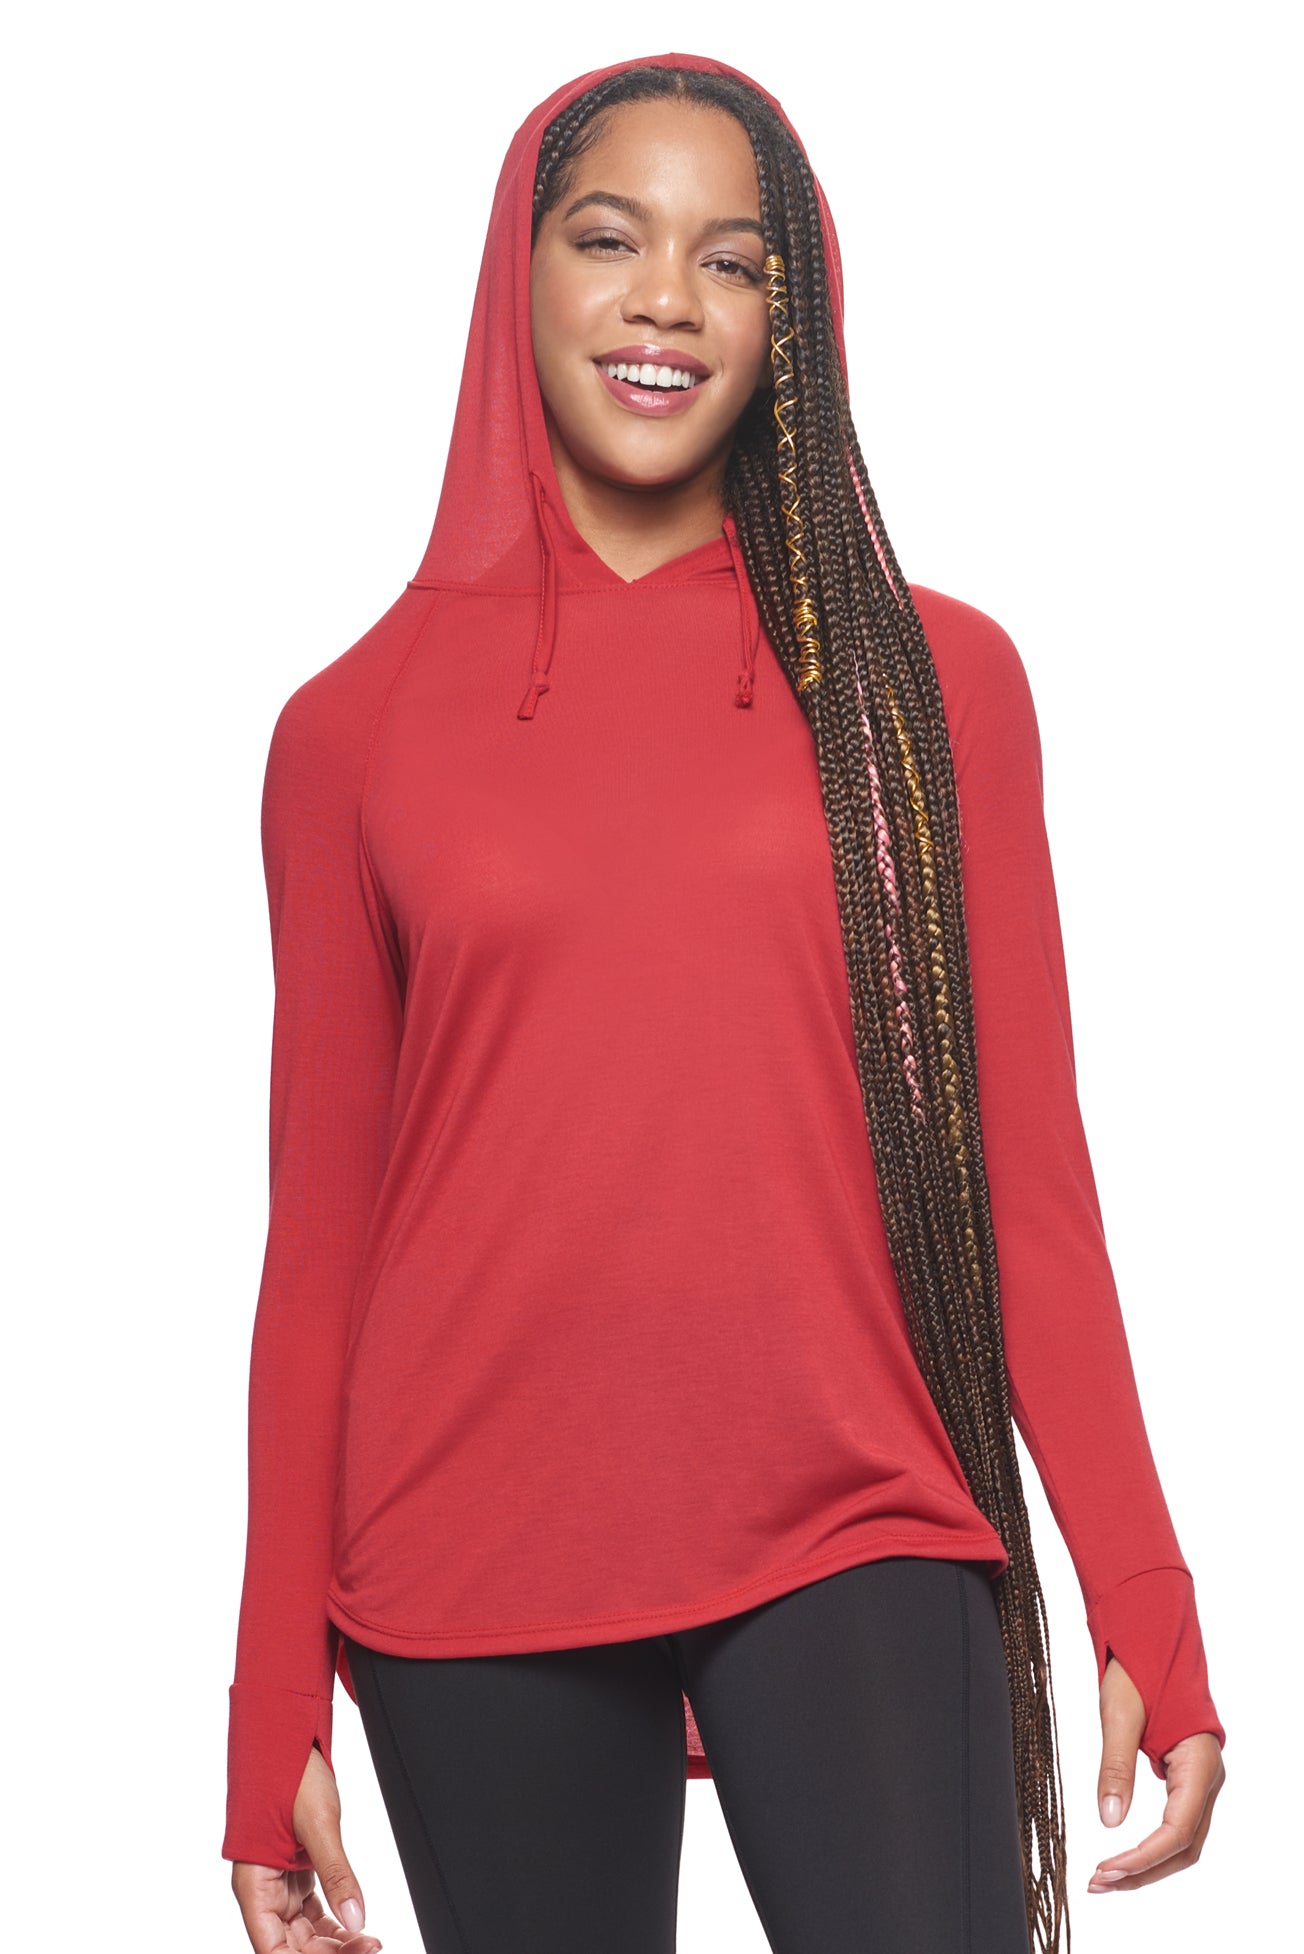 Expert Brand Wholesale Super Soft Eco-Friendly Performance Apparel Fashion Sportswear Women's Hoodie Long Sleeve Shirt Made in USA scarlet red 3#scarlet